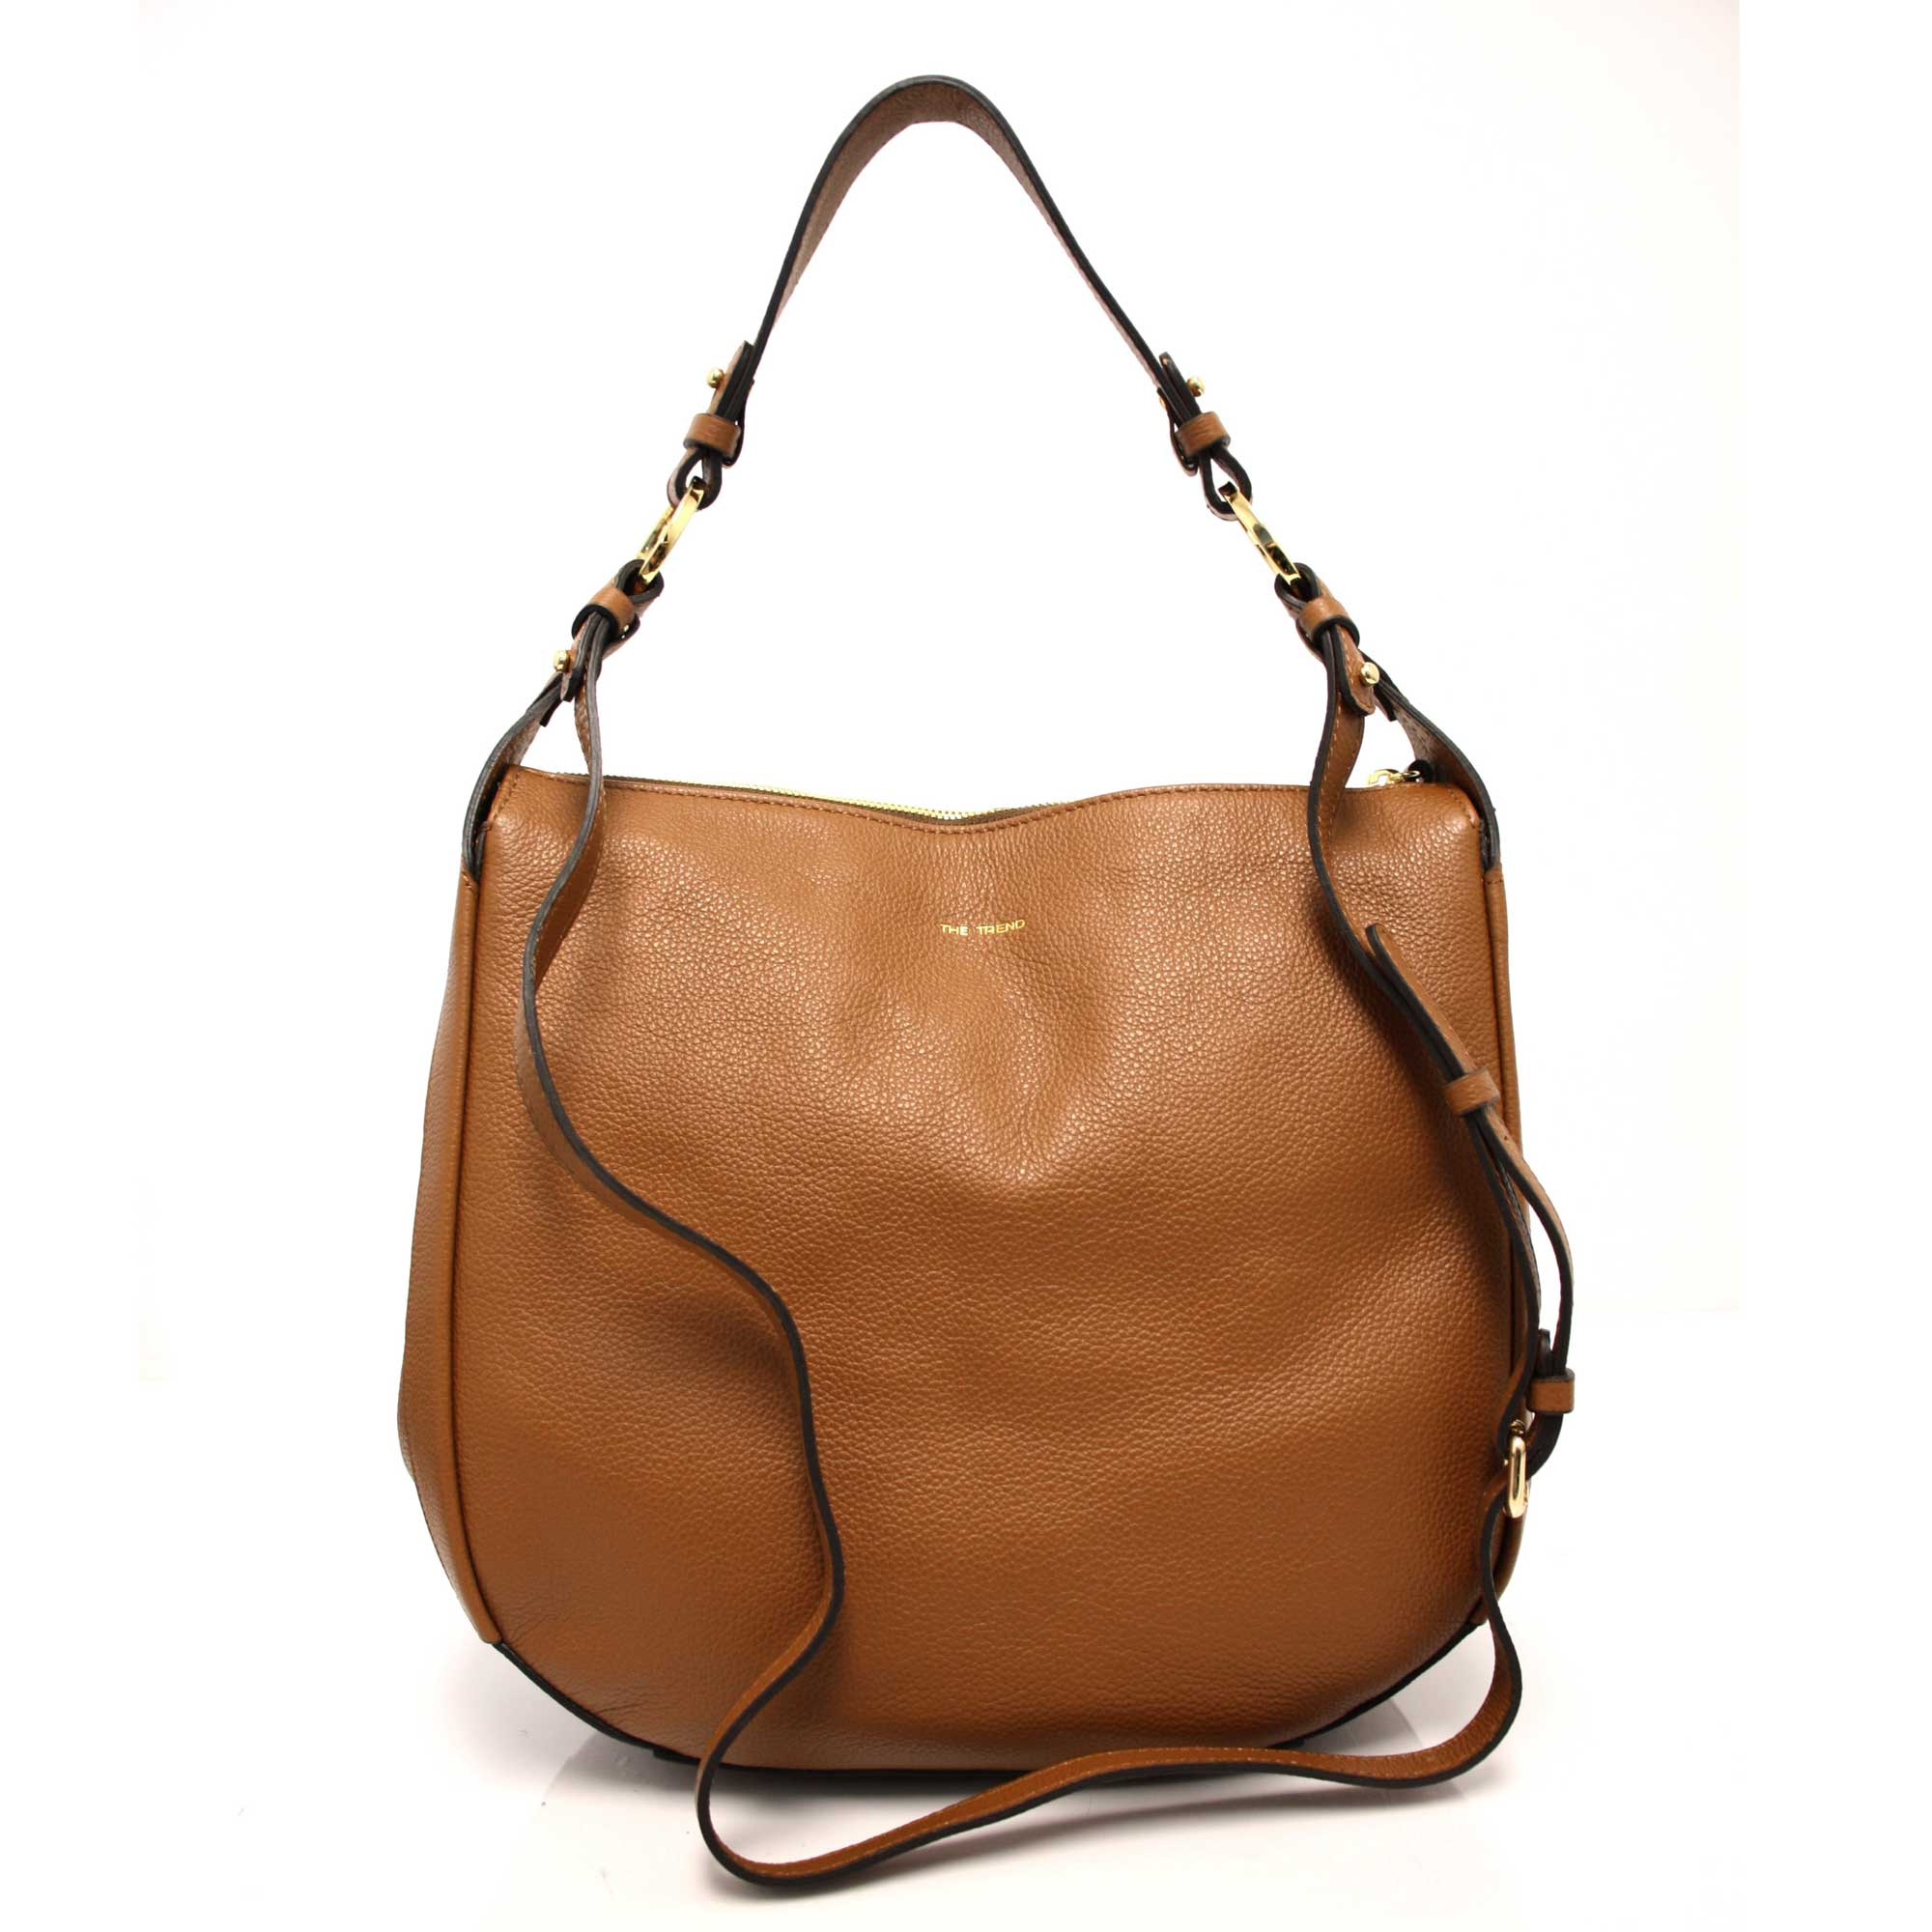 CLEMENTINE LEATHER BAG